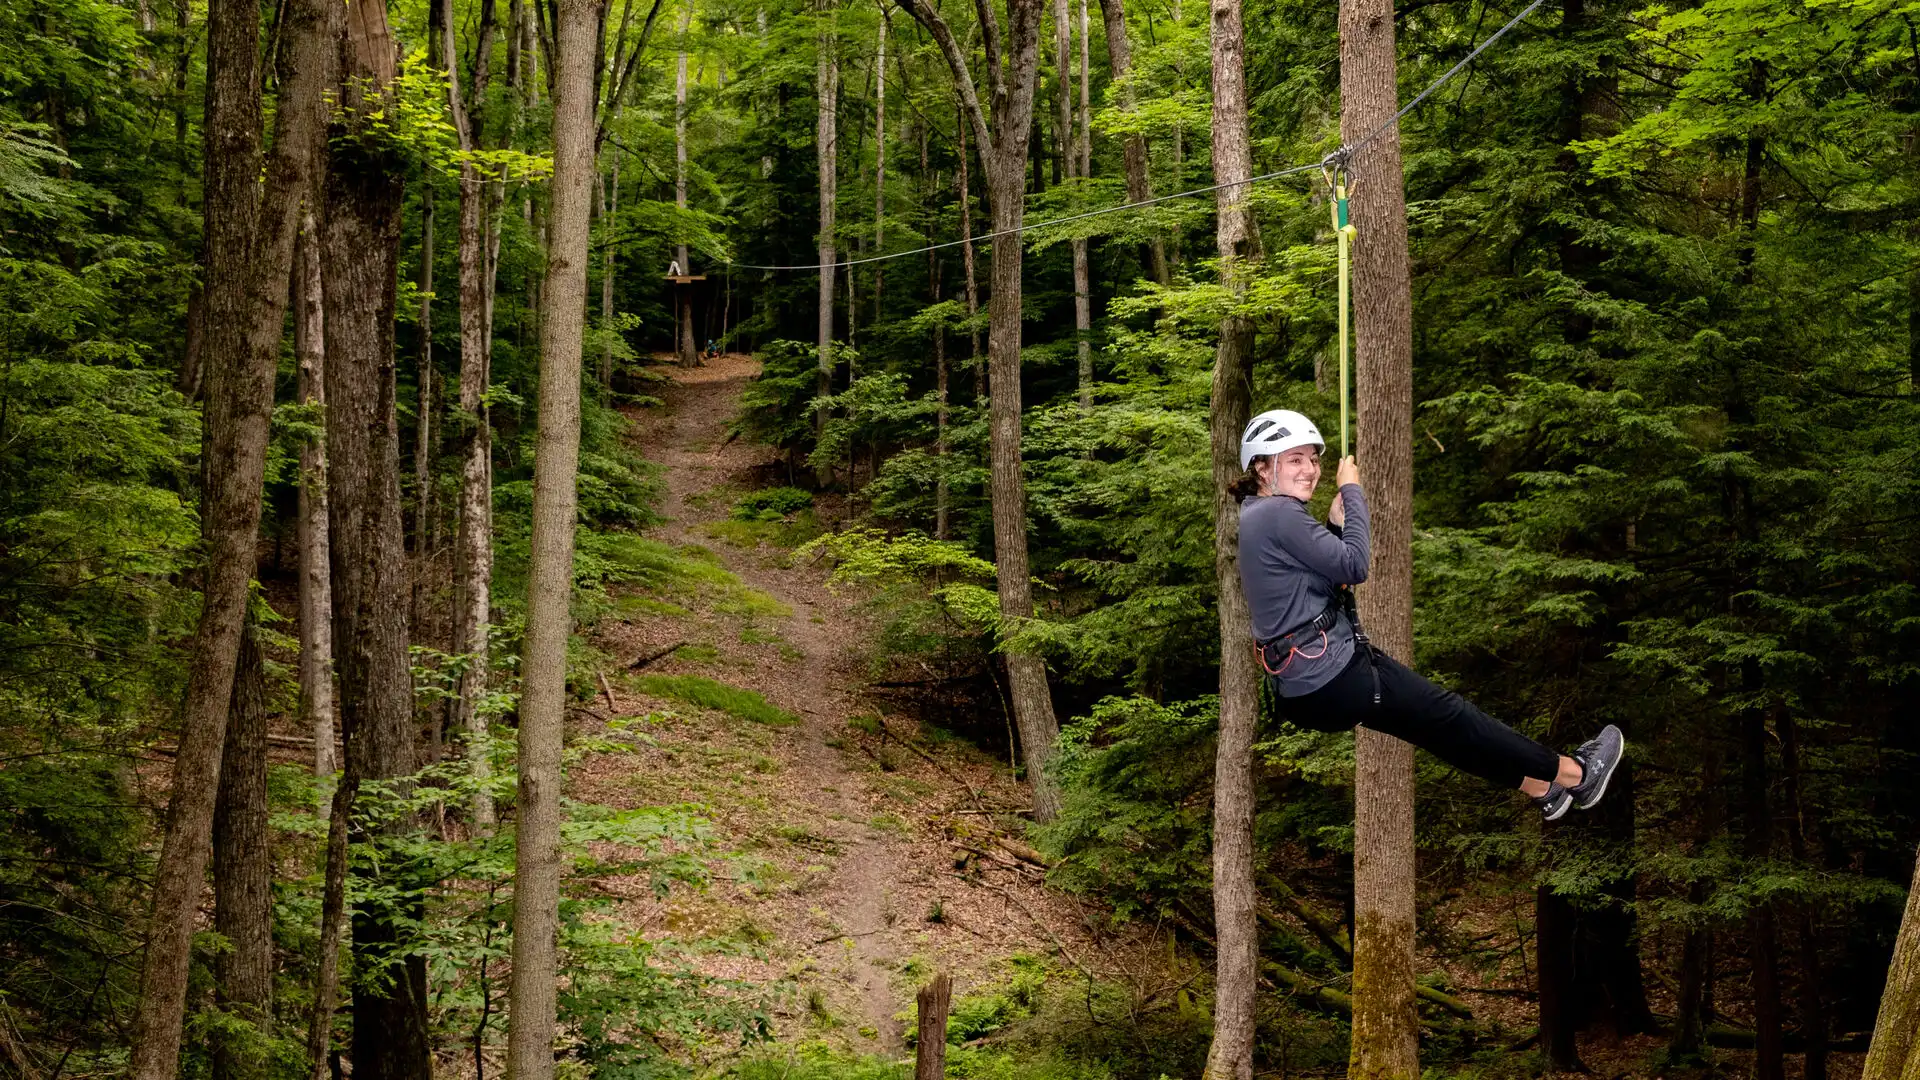 Houghton student riding zipline at the EPIC Adventures ropes course.